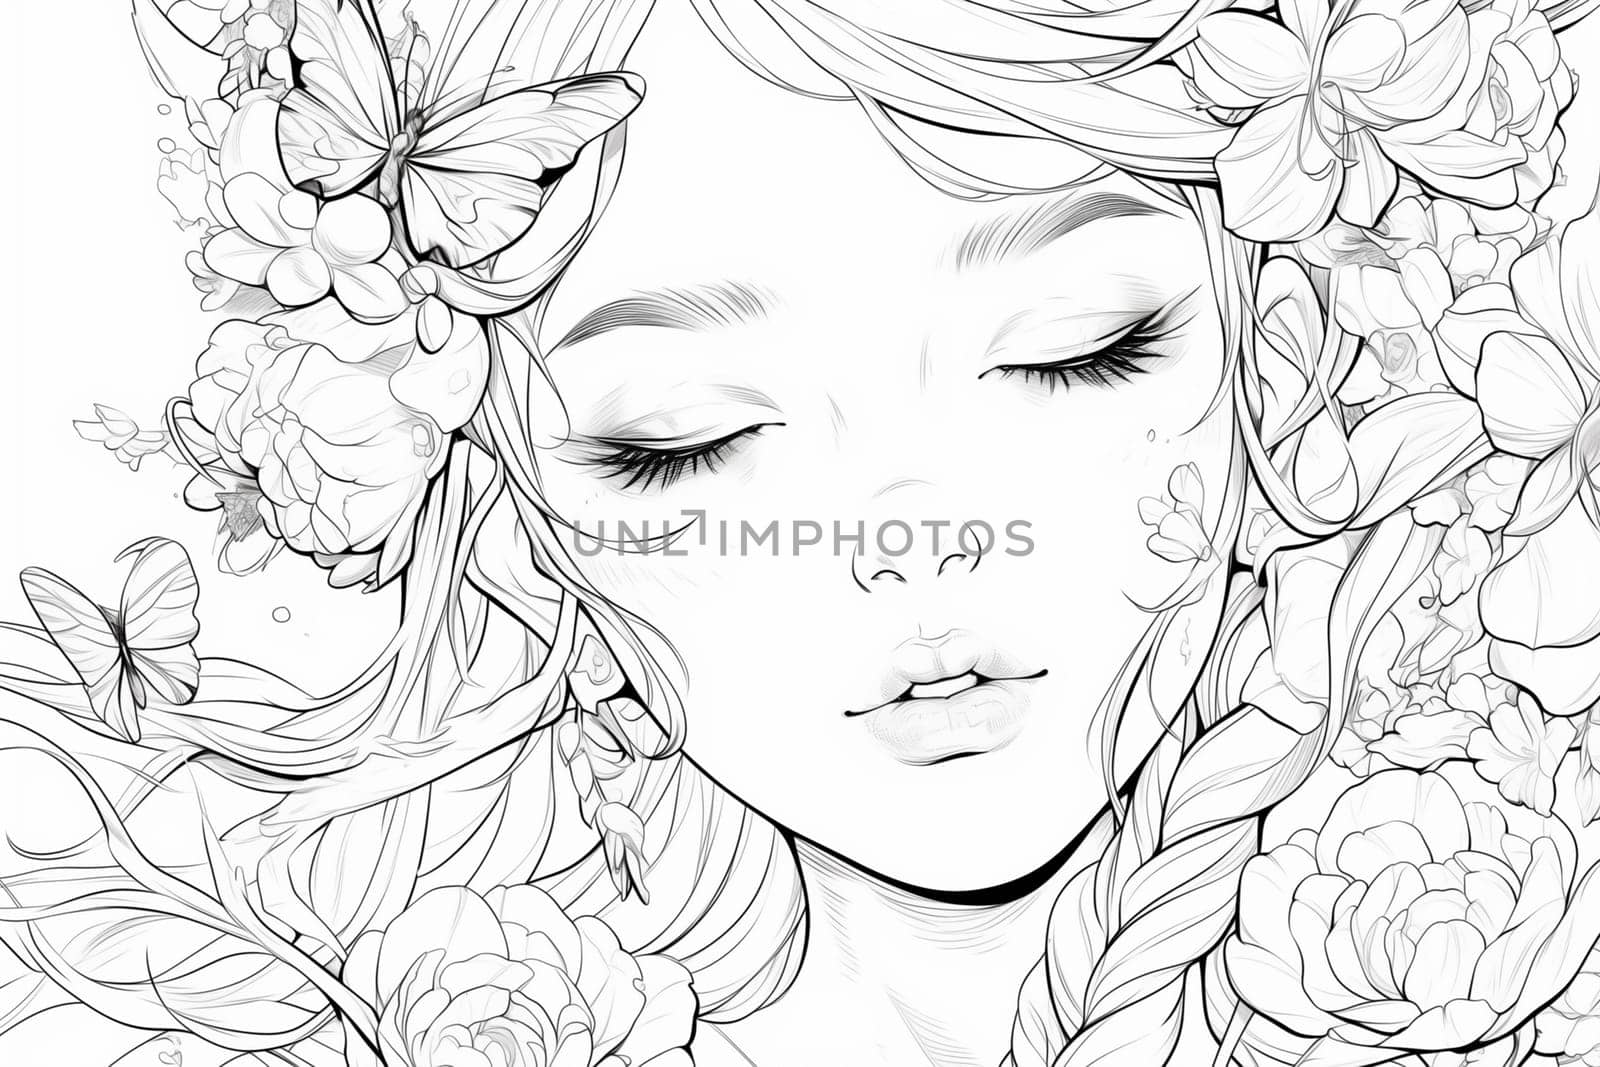 A black and white drawing of a girl with long hair adorned with delicate flowers, creating a whimsical and charming look.